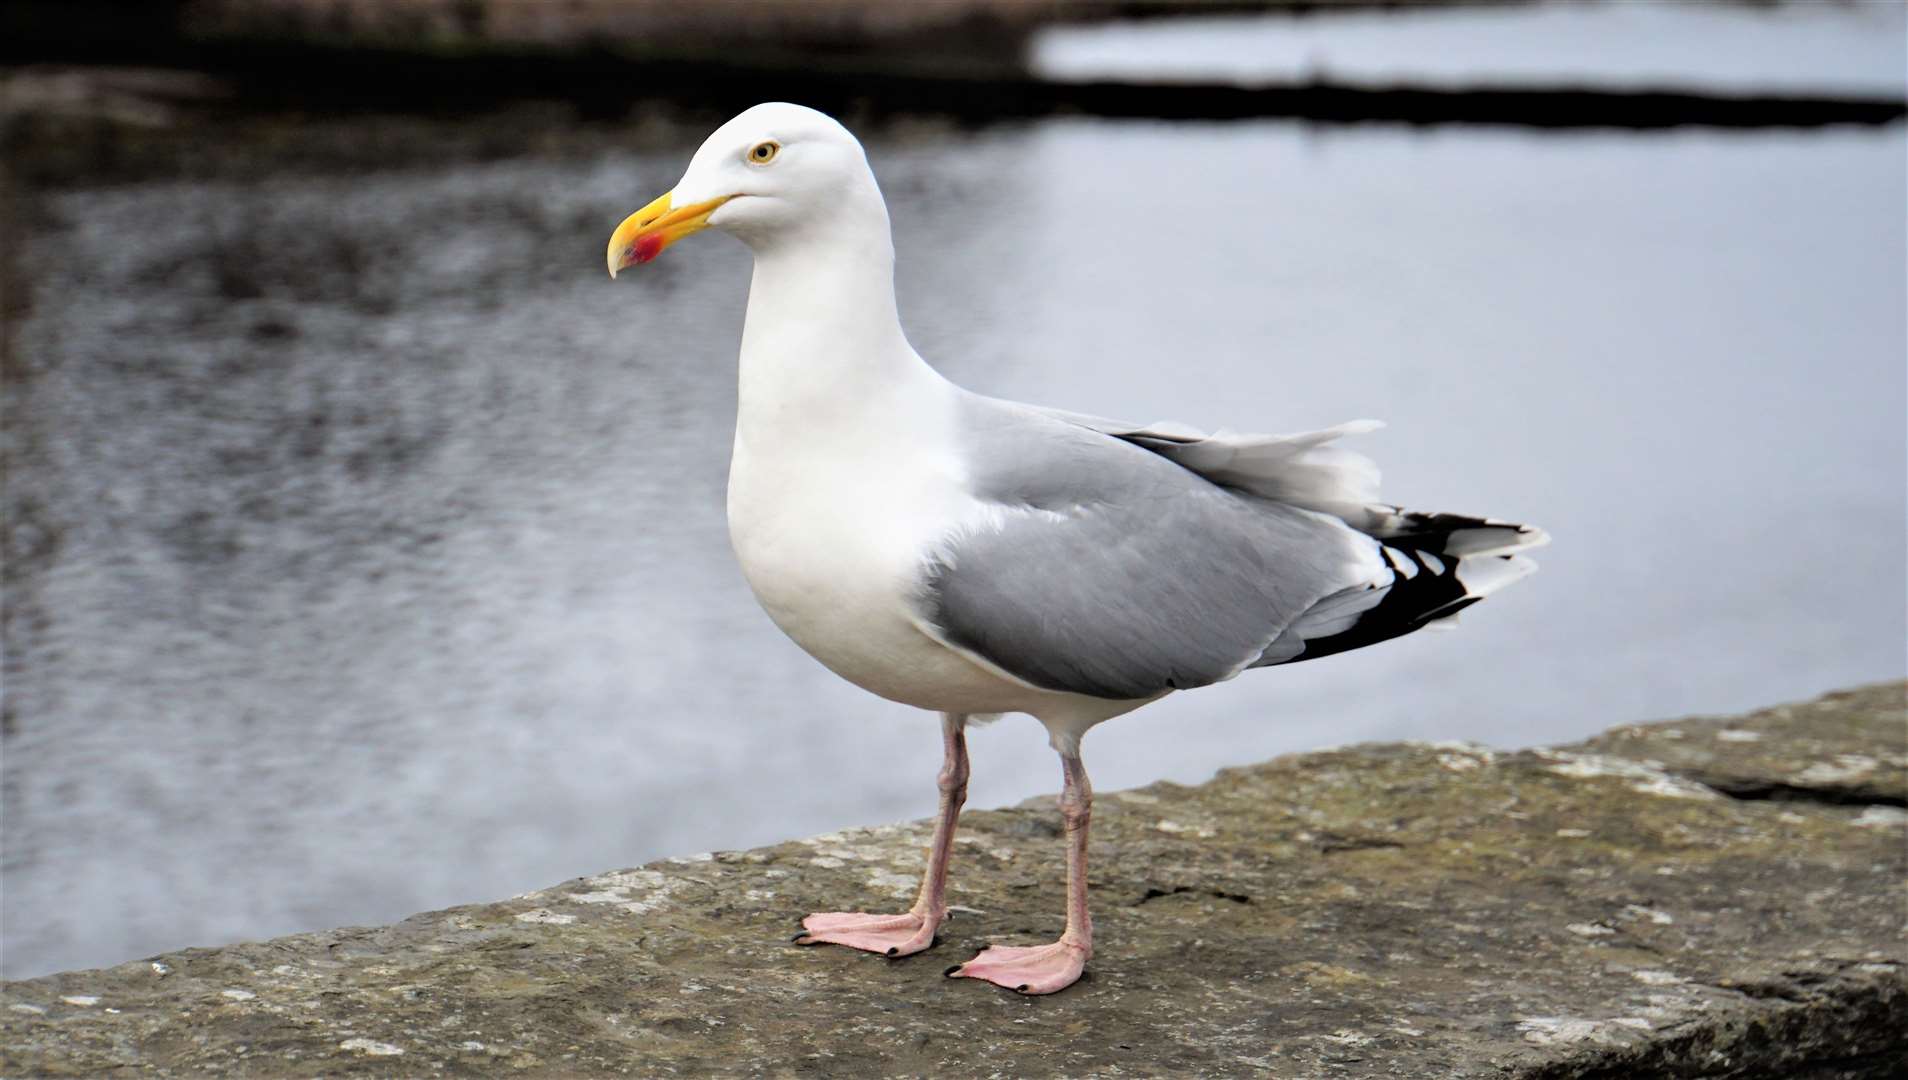 There have been many reports of seagulls being tangled up in PPE masks recently.